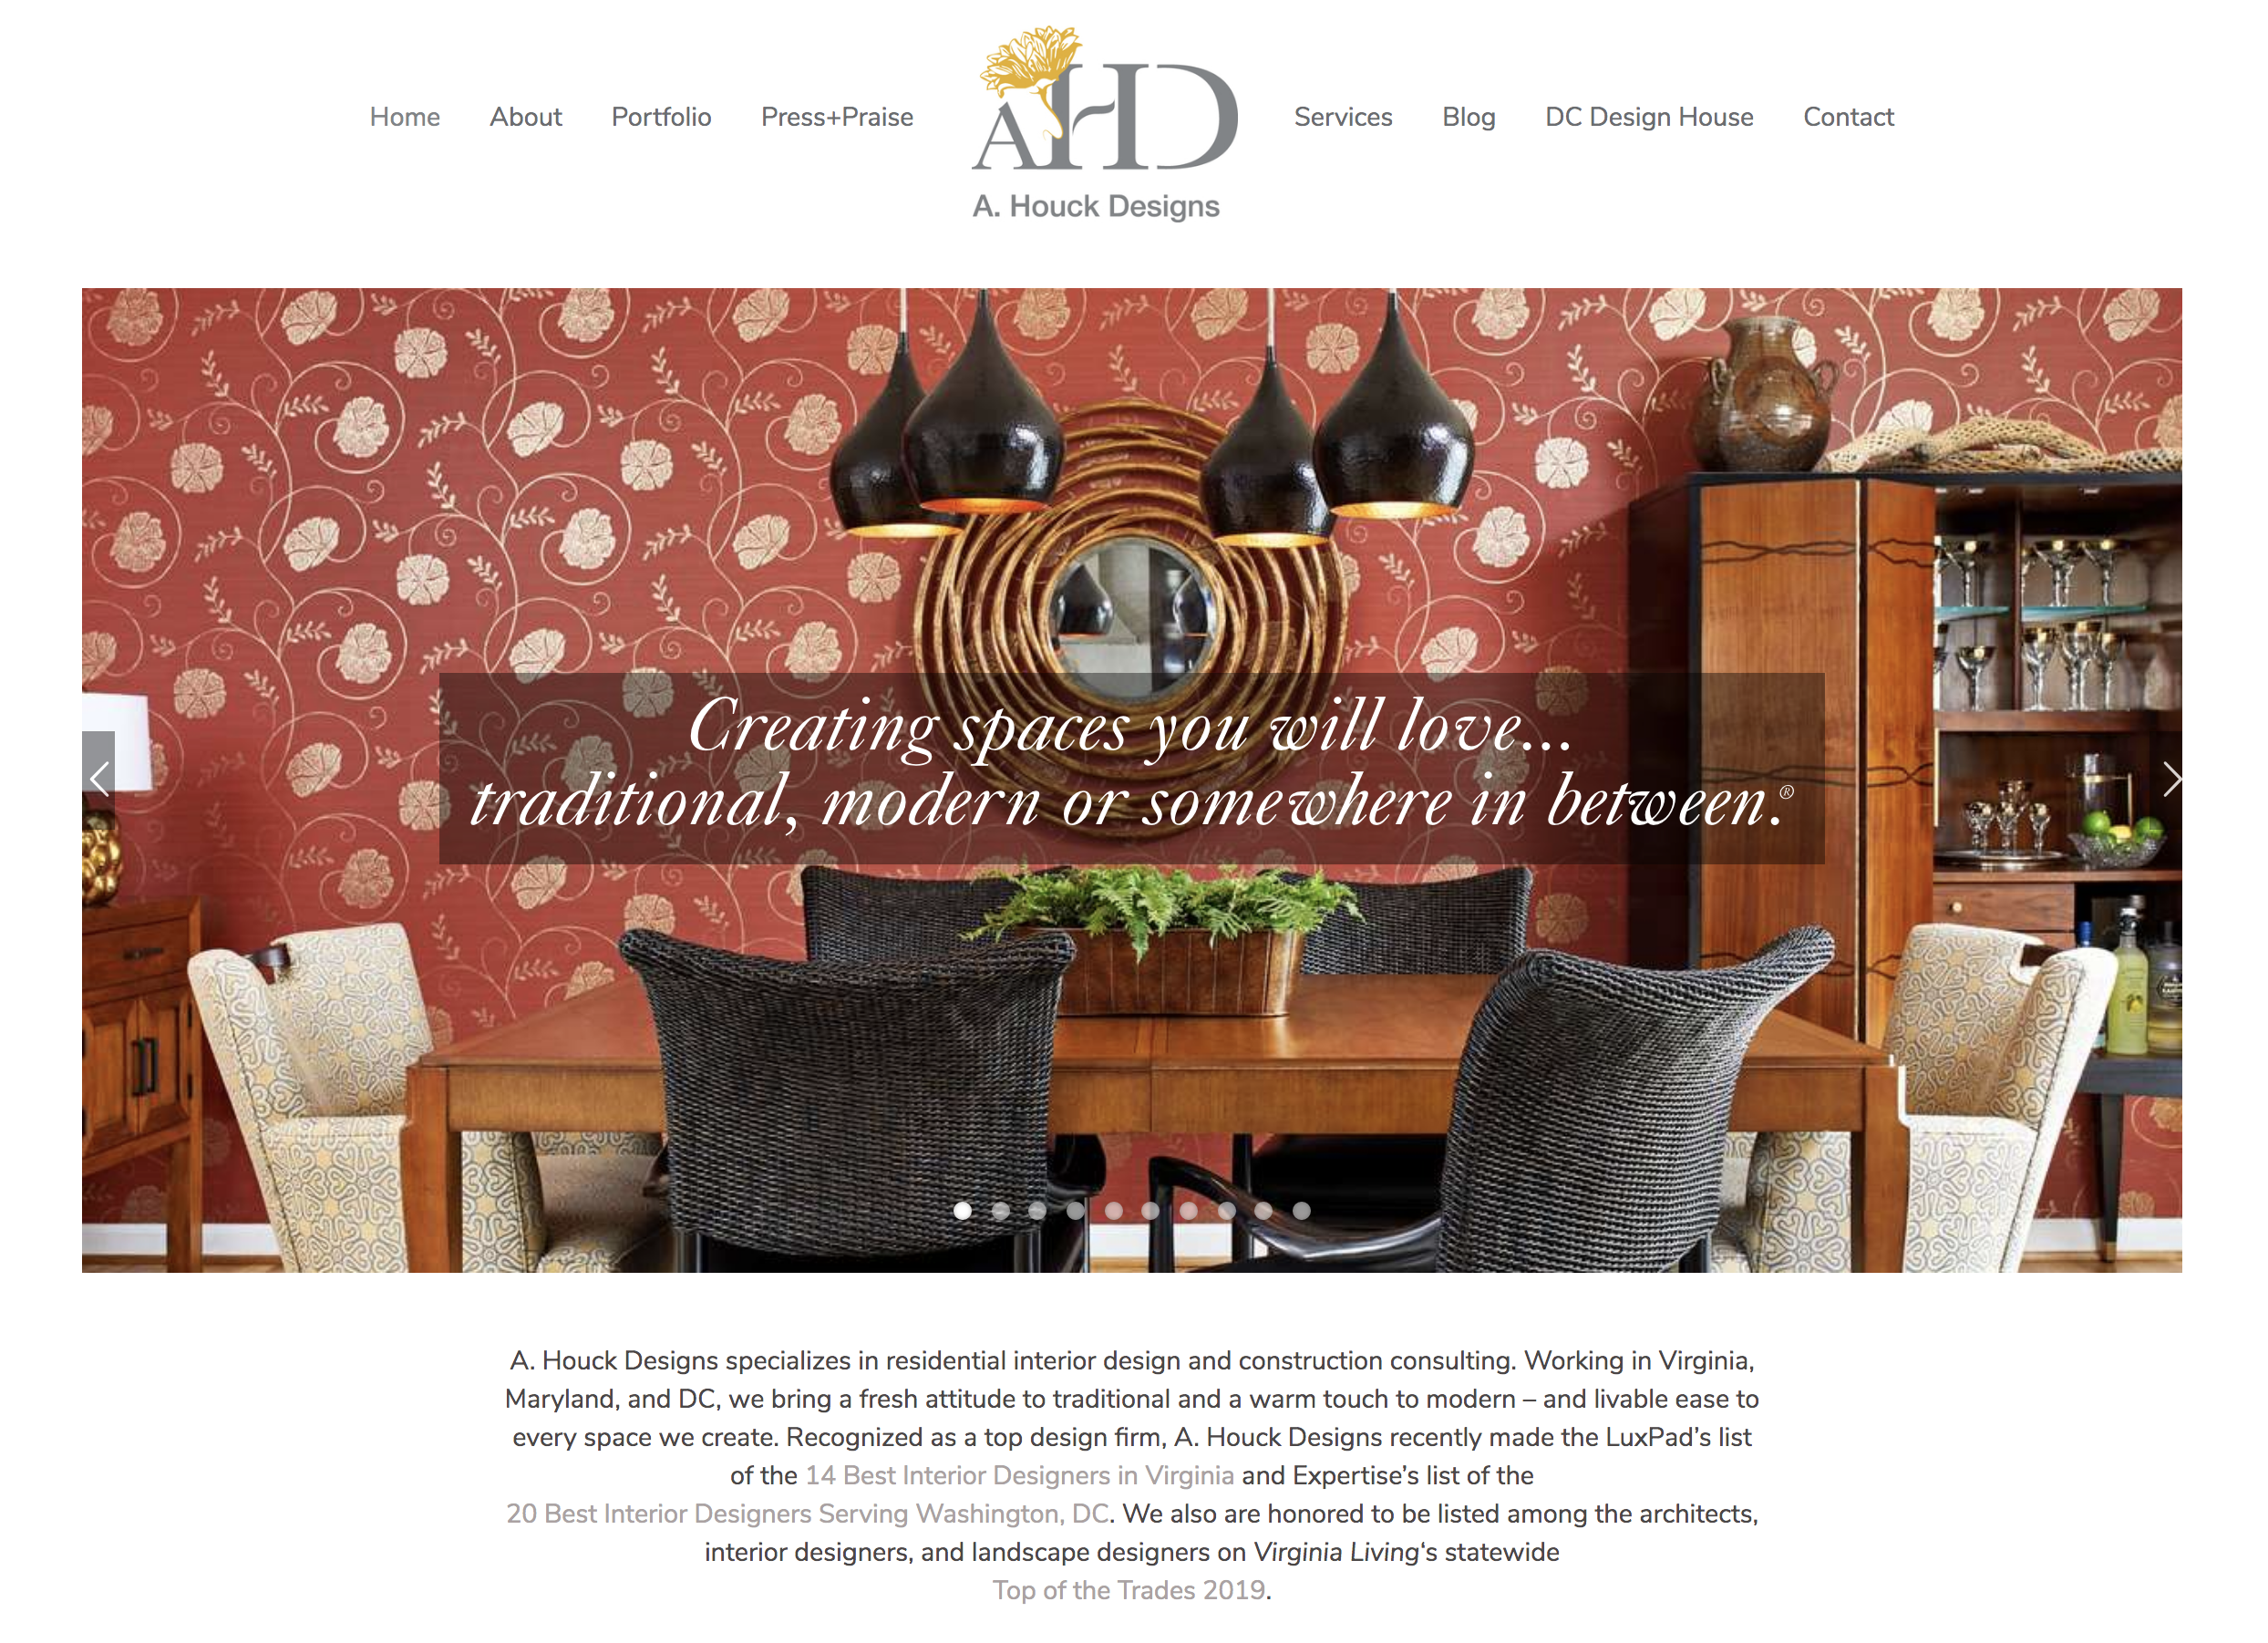 Homepage Of New A - Interior Dining - HD Wallpaper 